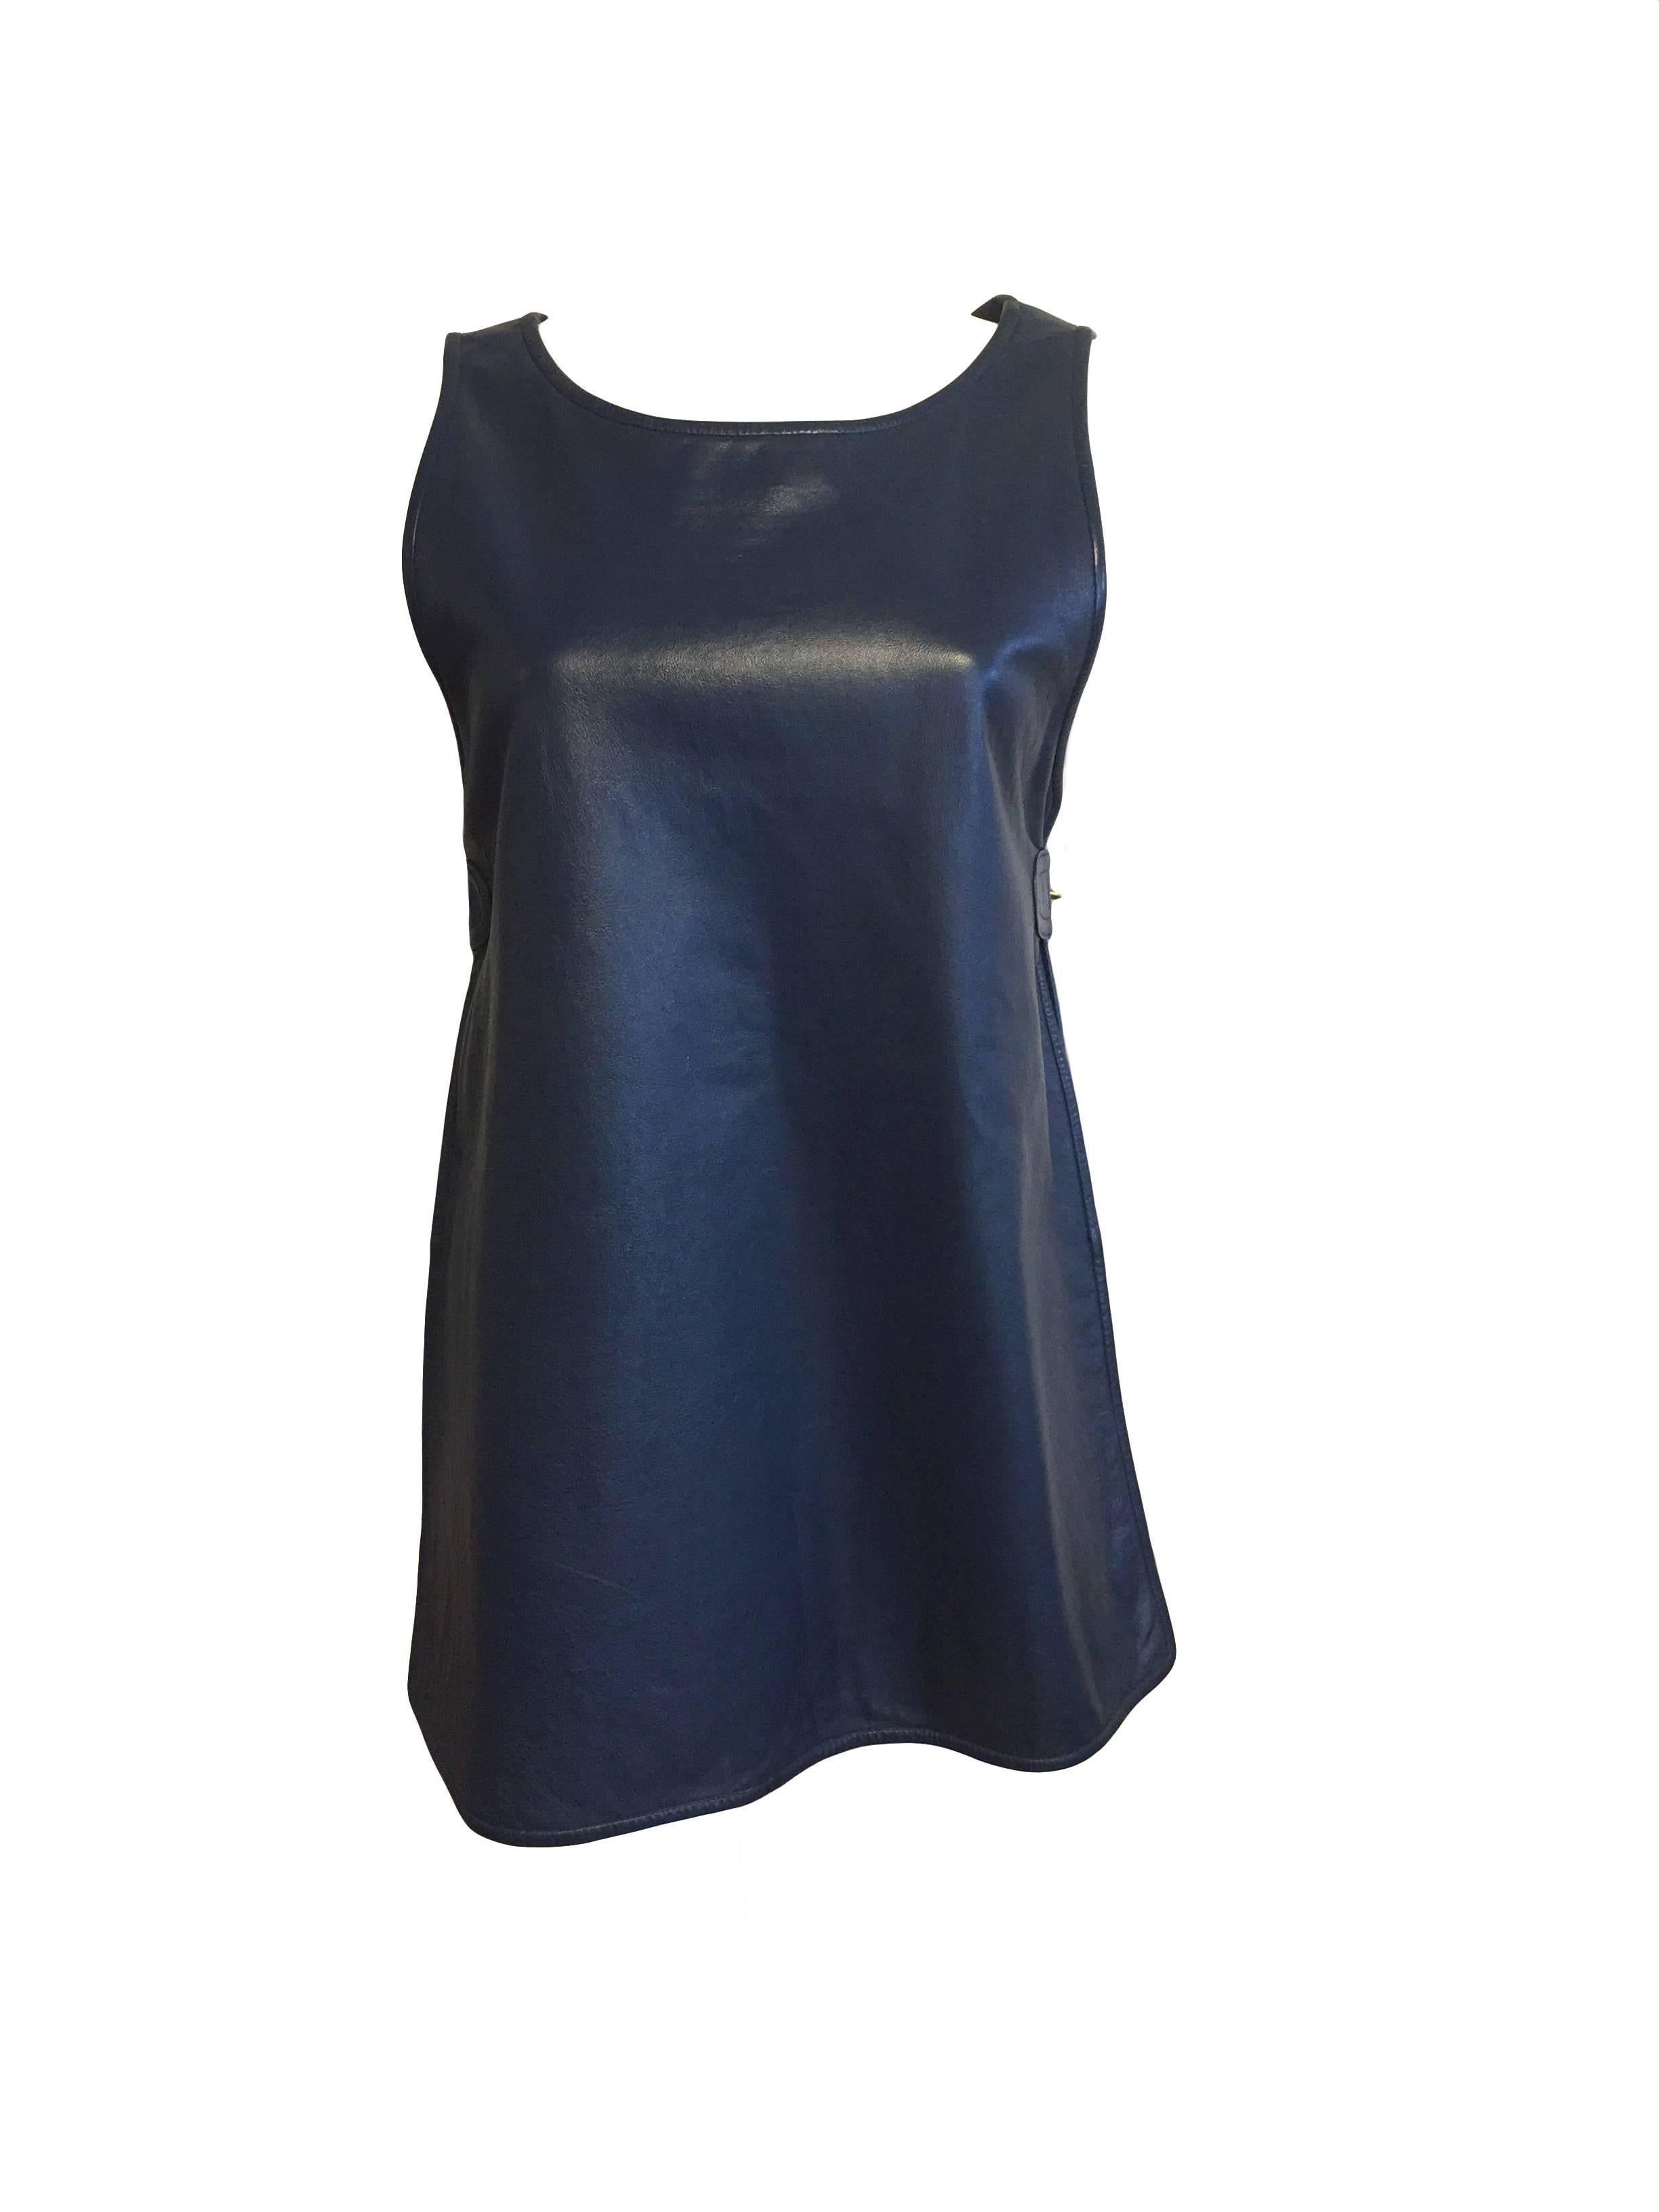 Rare iconic Bonnie Cashin Sills mod navy leather dress or tunic with adjustable turnlock side closures. Made from angola leather and lined in cotton blend, it fastens on each side with Cashin's (and Coach's) trademark brass toggles. 

Measurements